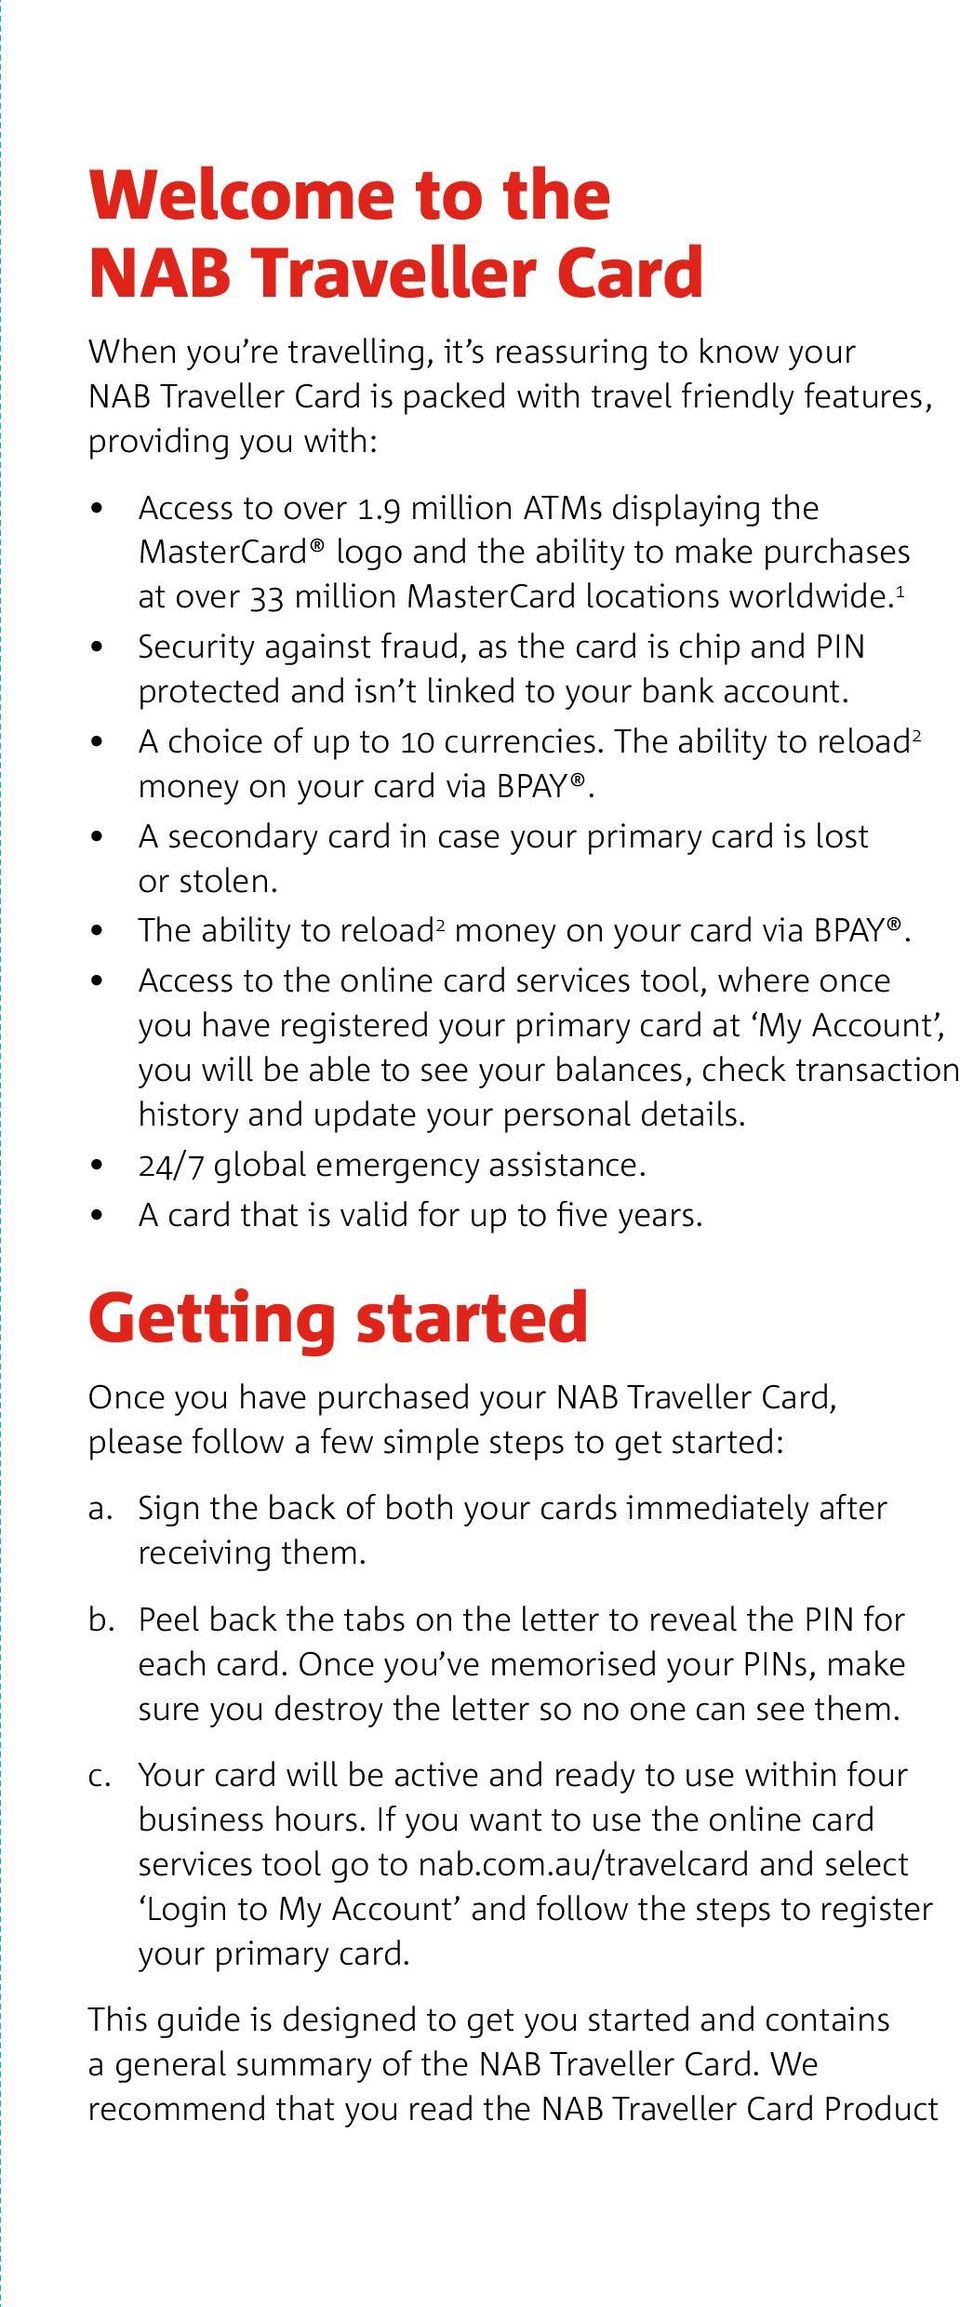 1 Security against fraud, as the card is chip and PIN protected and isn t linked to your bank account. A choice of up to 10 currencies. The ability to reload 2 money on your card via BPAY.